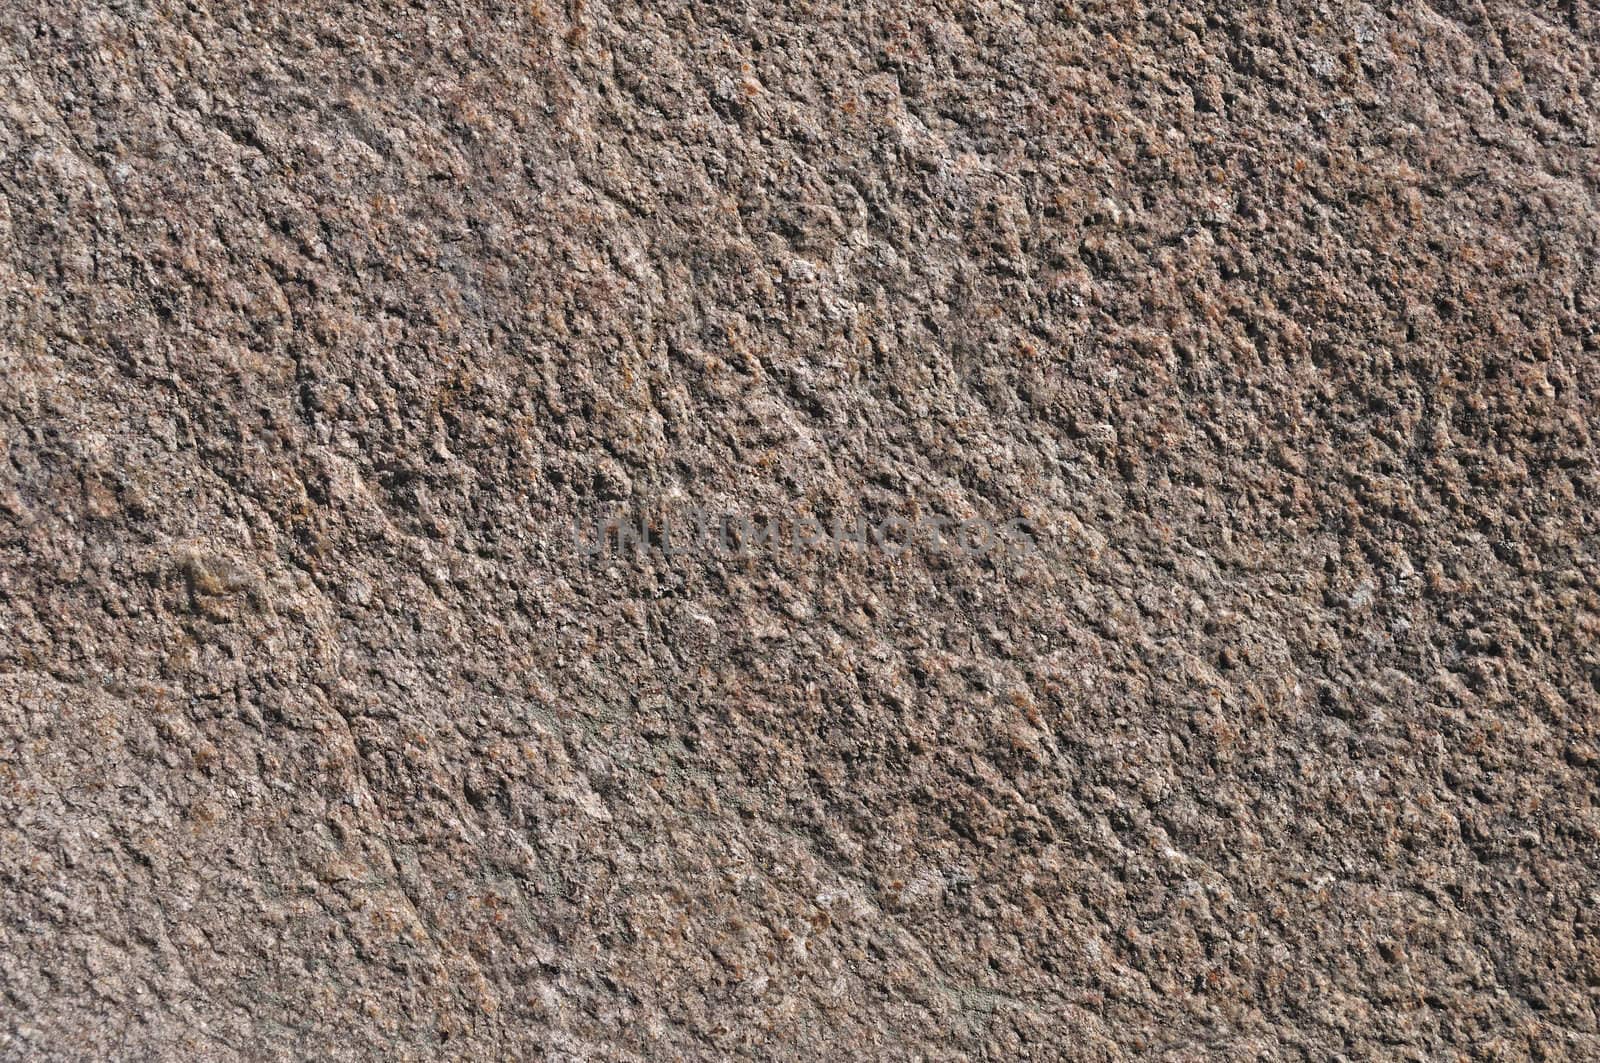 Fragment of natural brown stone surface texture